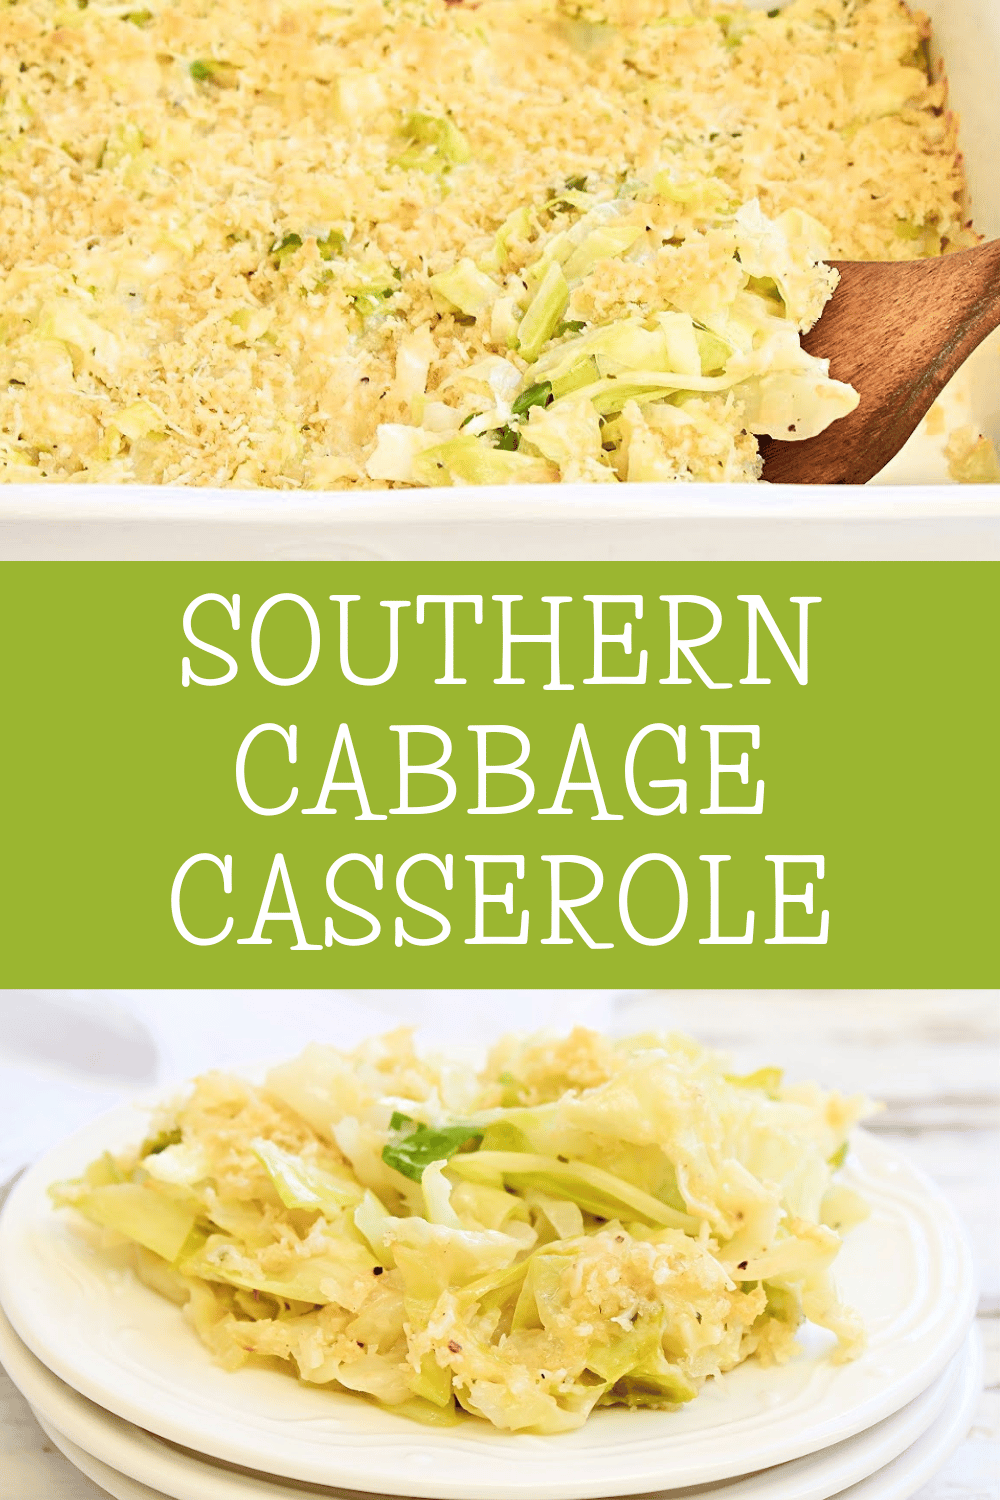 Cheesy Cabbage Casserole ~ This old-fashioned, creamy baked cabbage dish with crunchy topping is easy to assemble and perfect for holidays, potlucks, or Sunday dinners at home. via @thiswifecooks